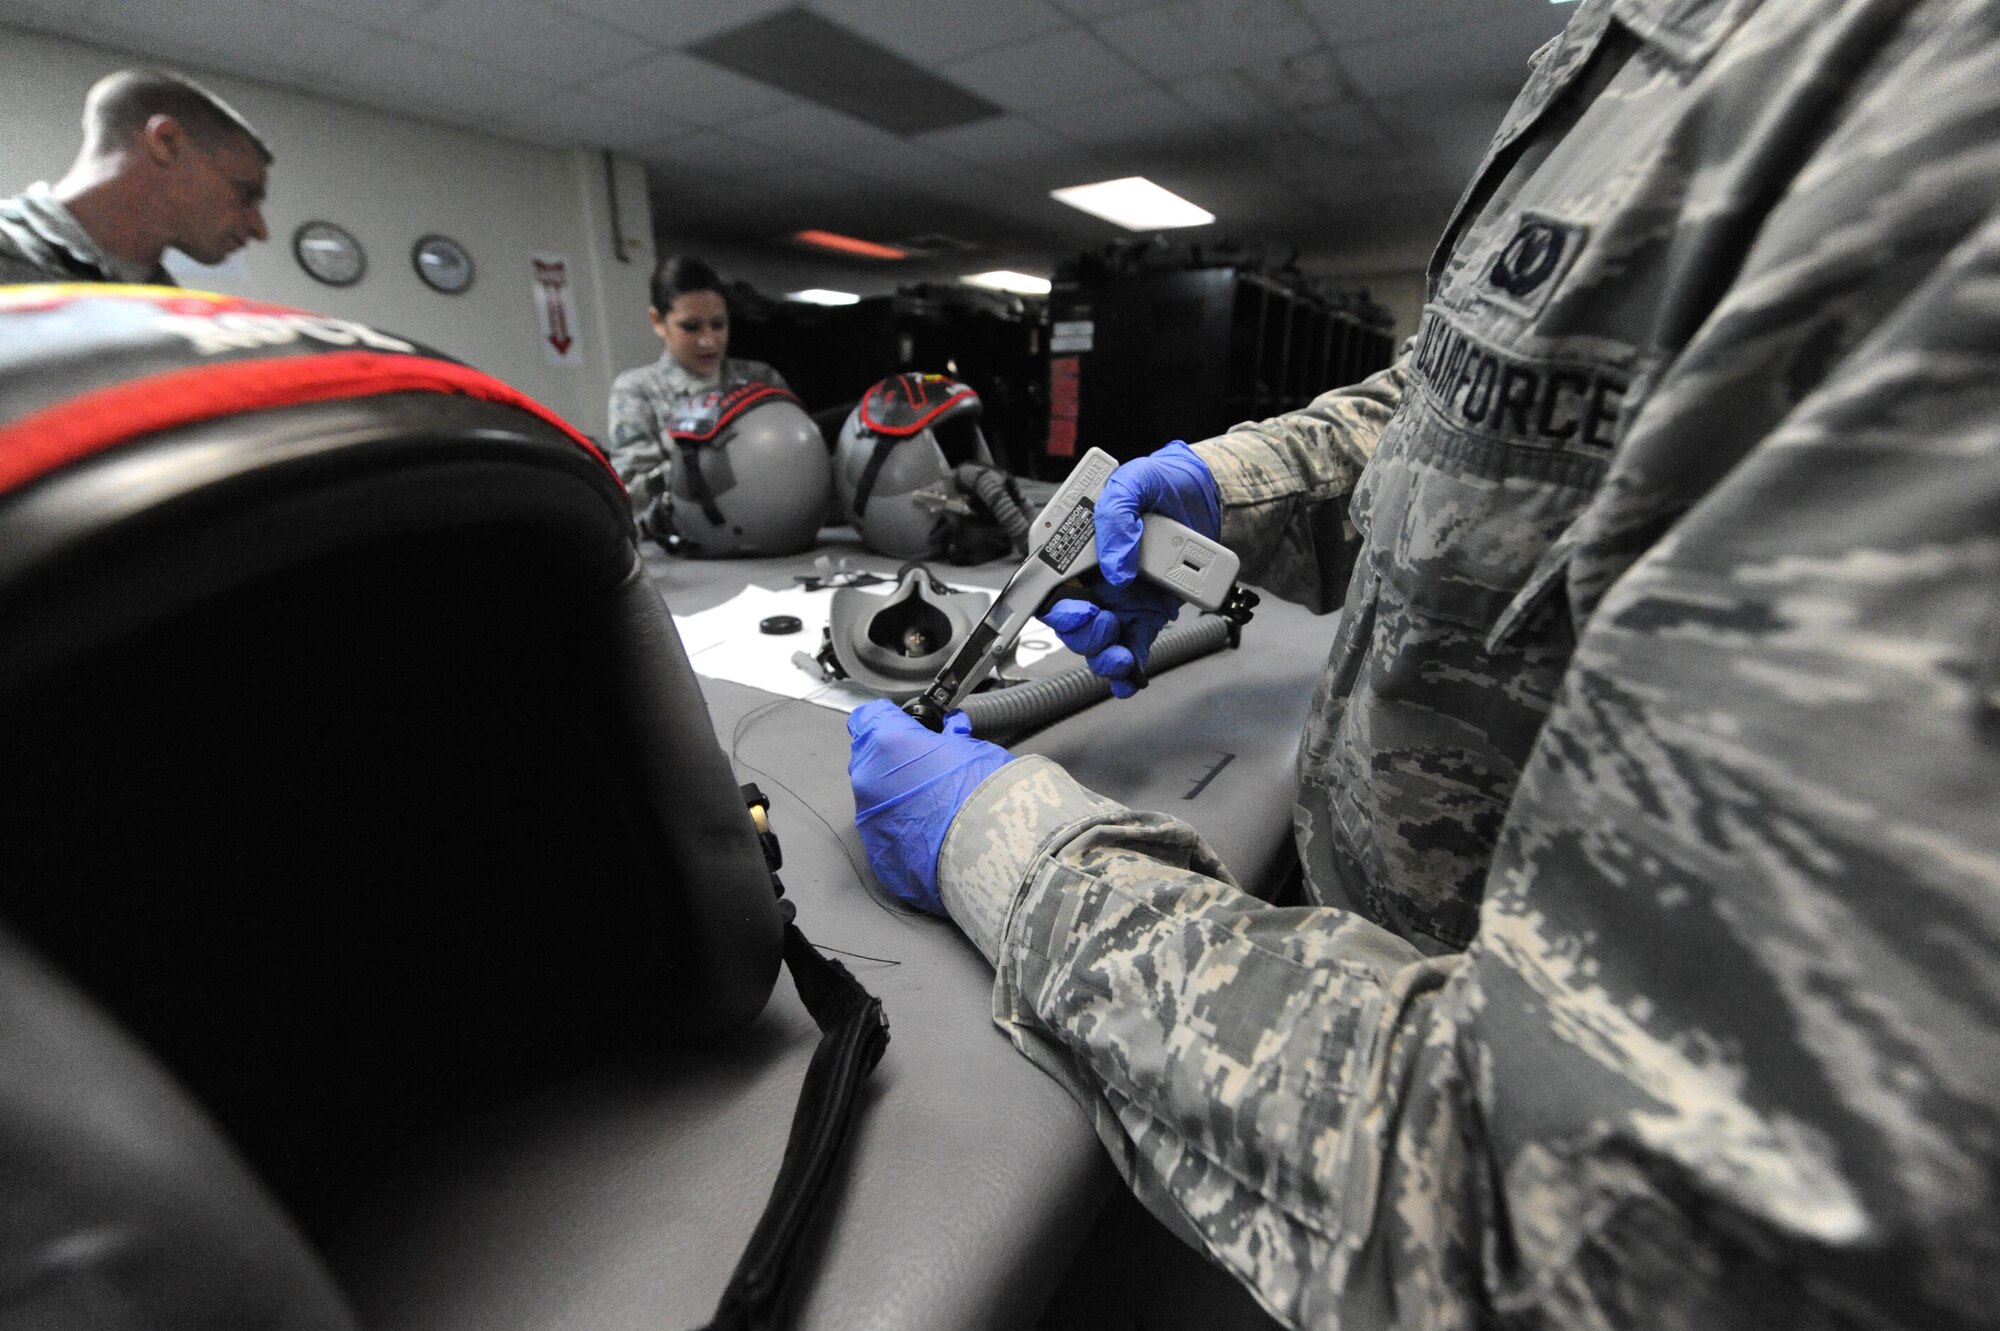 U.S. Air Force Senior Airman Brandon Perry, an Aircrew Flight Equipment technician, assigned with the 509th Operation Support Squadron, performs preventative maintenance on an oxygen supply tube, at Andersen Air Force Base, Guam, Aug. 9, 2016. Approximately 200 Airmen and three B-2s from Whiteman Air Force Base, Mo., deployed here in support of U.S. Strategic Command’s Bomber Assurance and Deterrence mission. (U.S. Air Force photo by Tech. Sgt. Miguel Lara III)